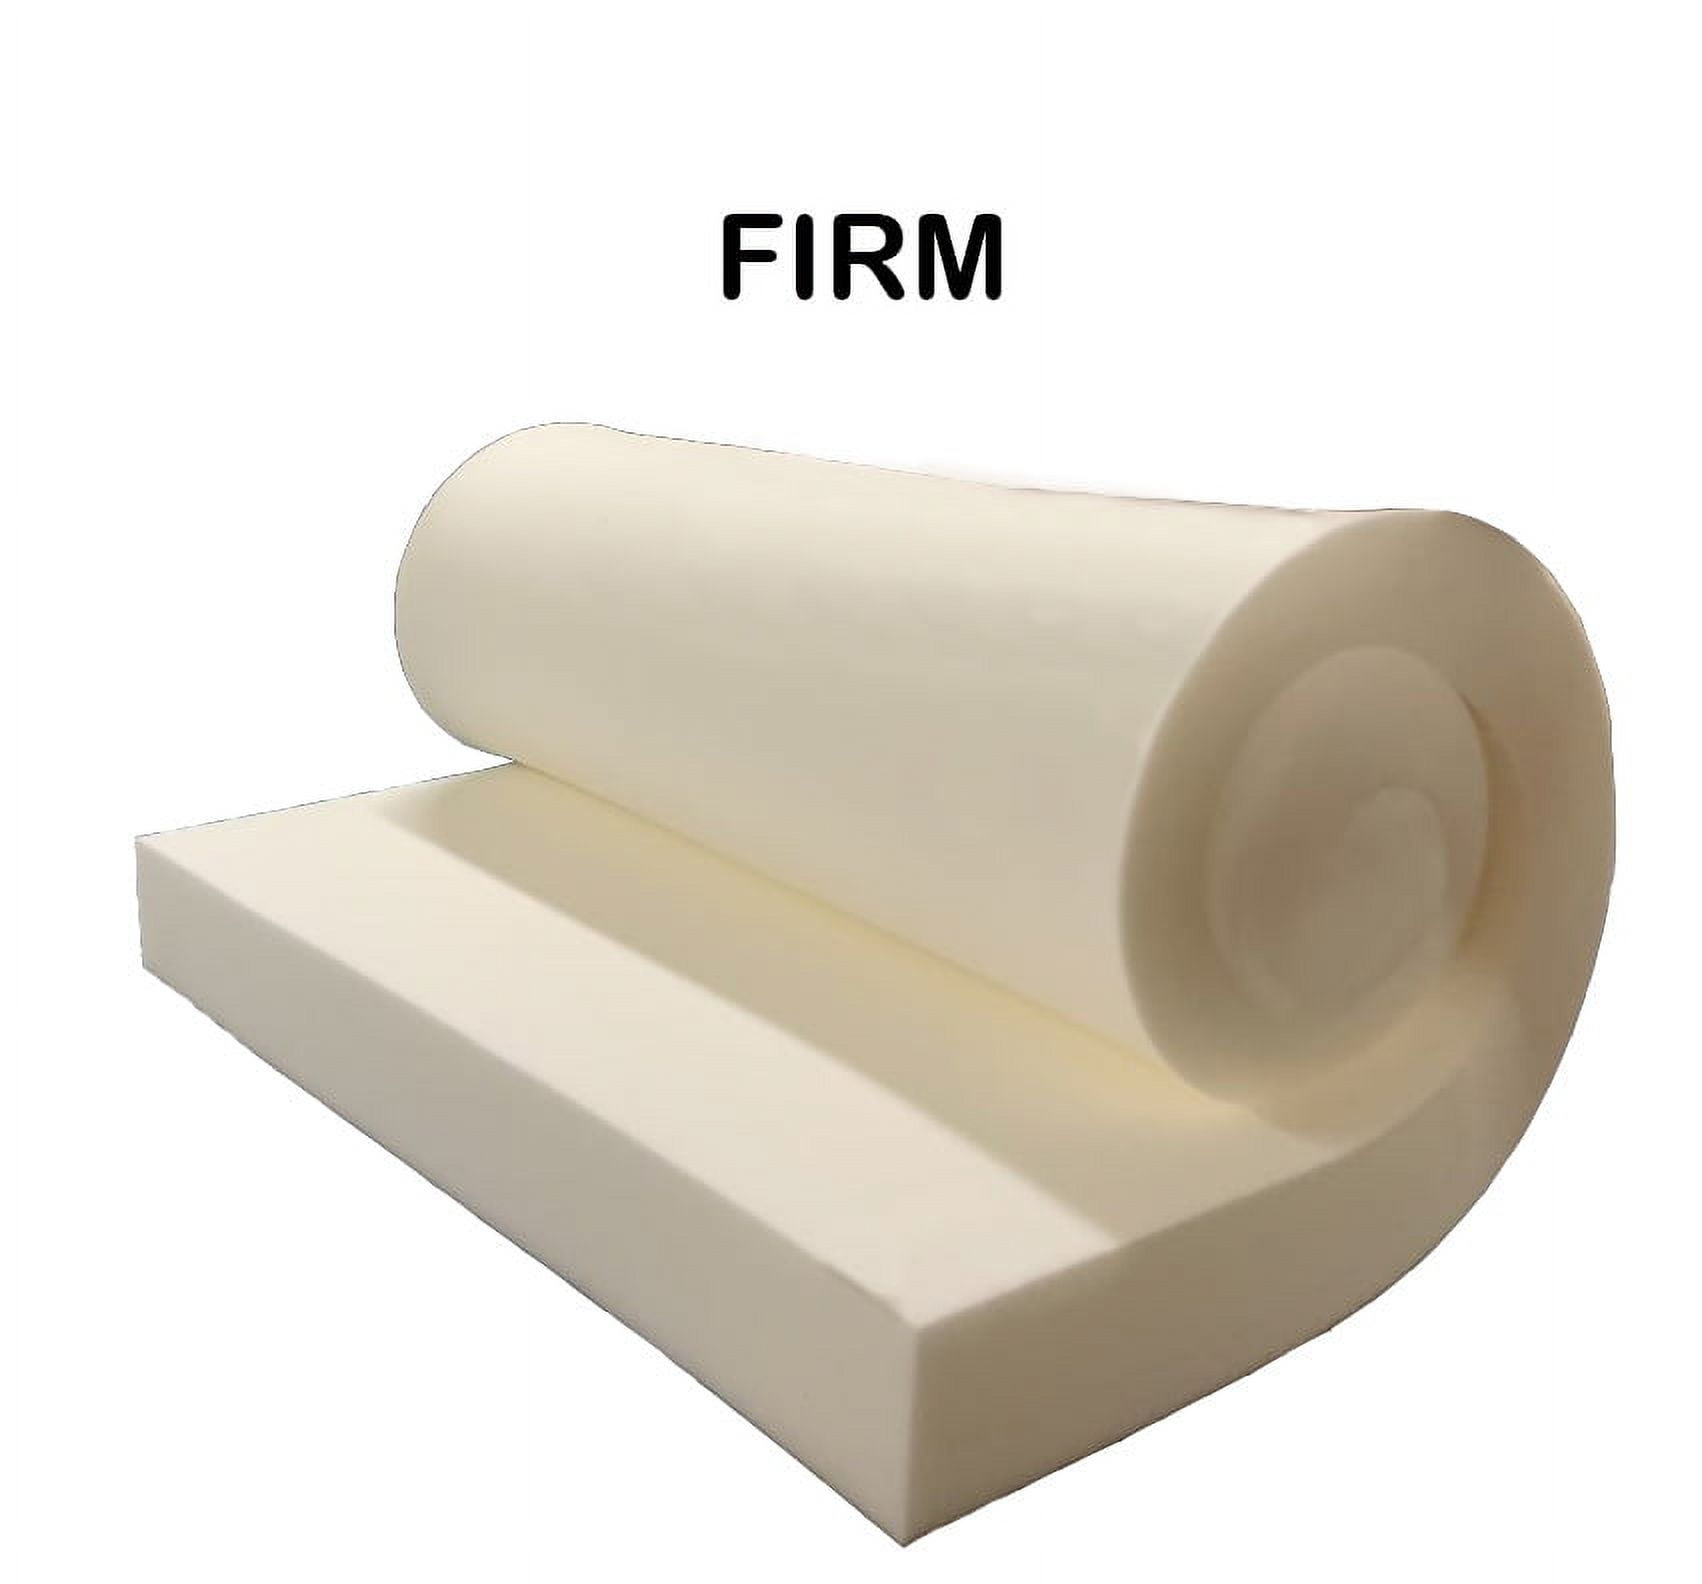  FoamTouch (2 Pack) Upholstery Foam Cushion High Density 1  Height x 24 Width x 84 Length Made in USA : Arts, Crafts & Sewing